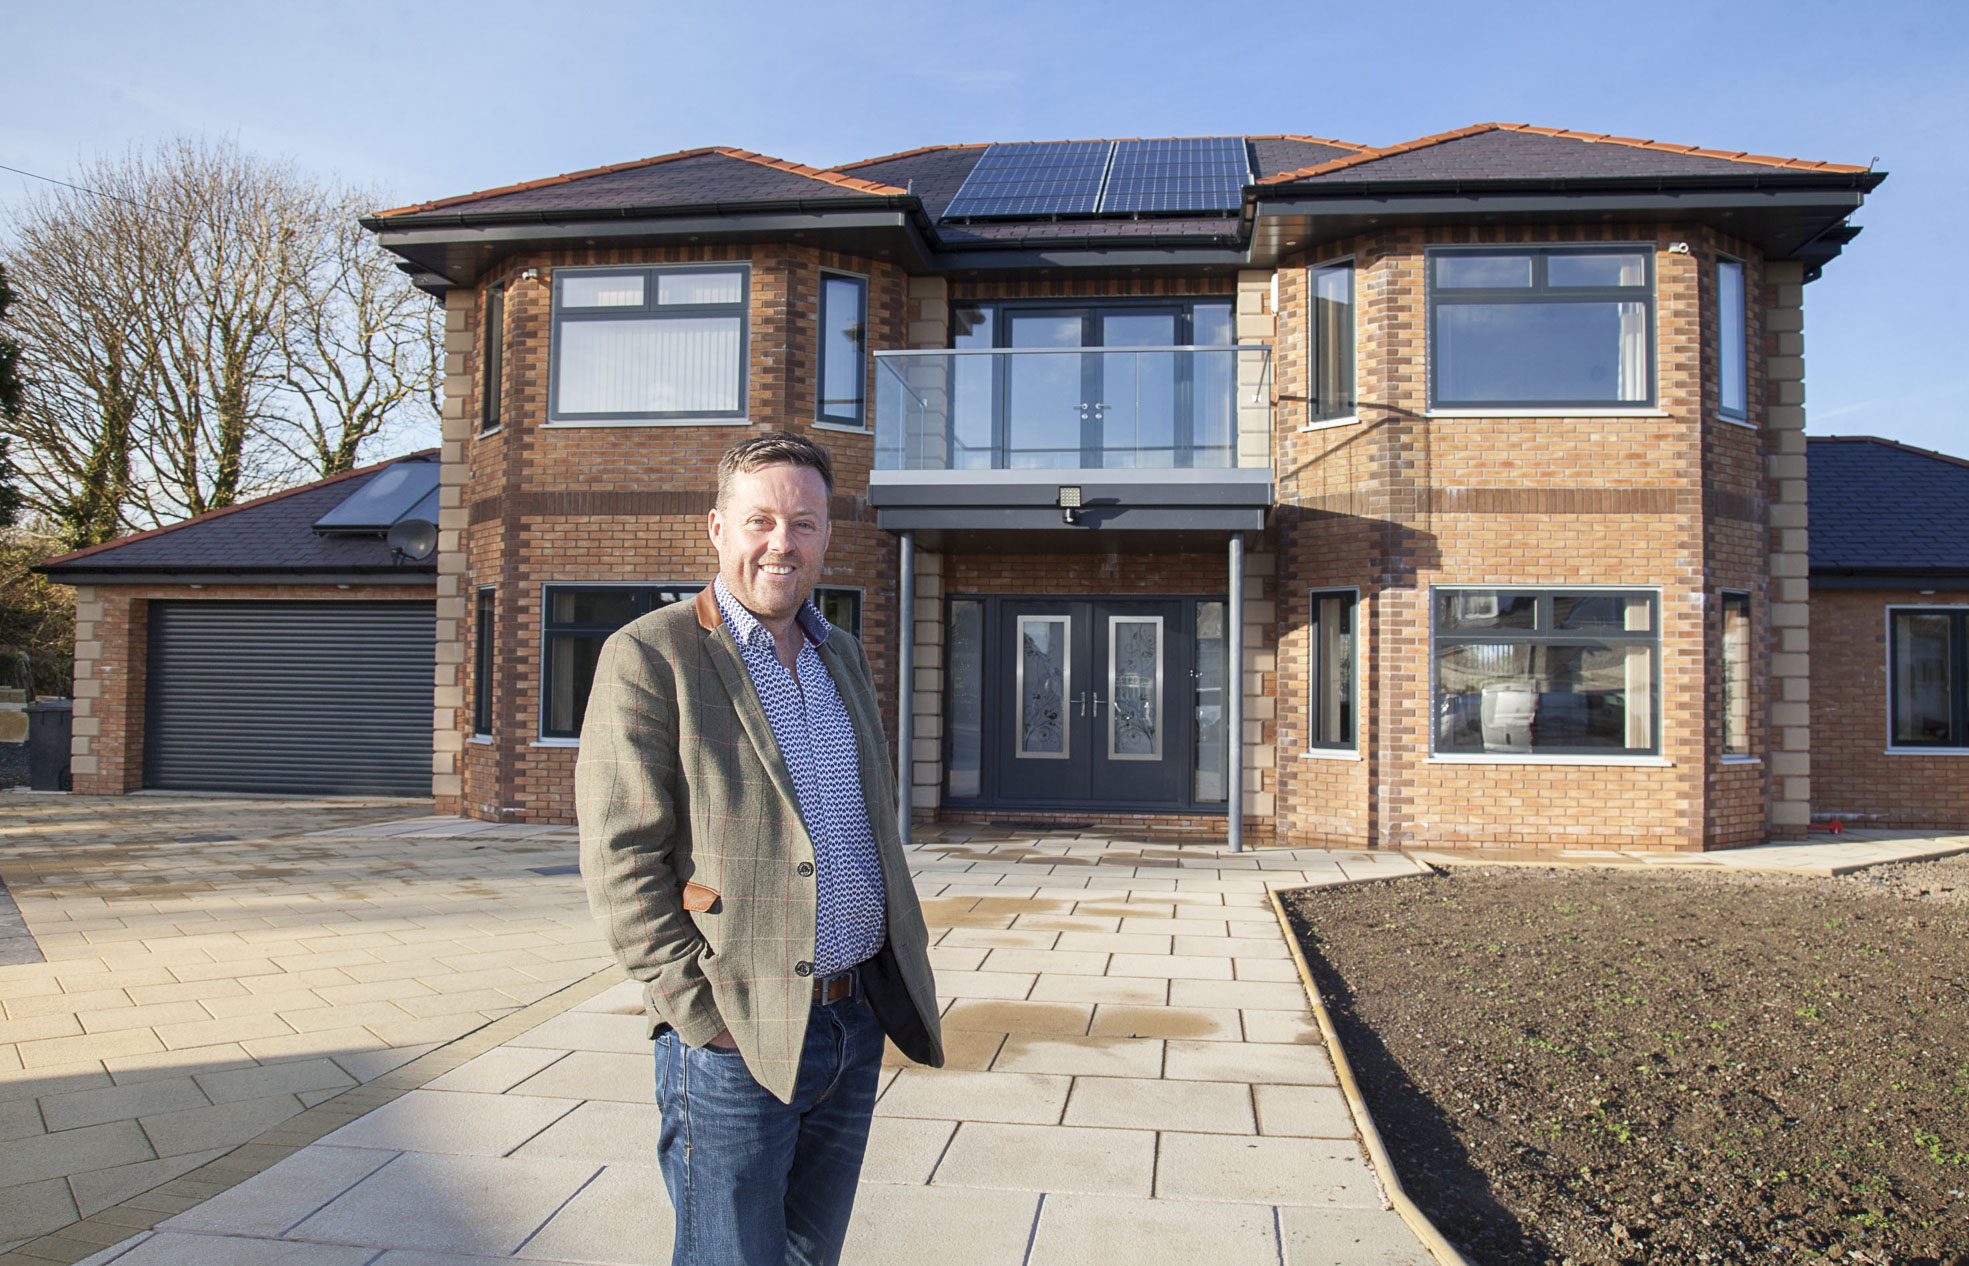 Home improvements firm breaks through £2m barrier thanks to hit TV show Grand Designs